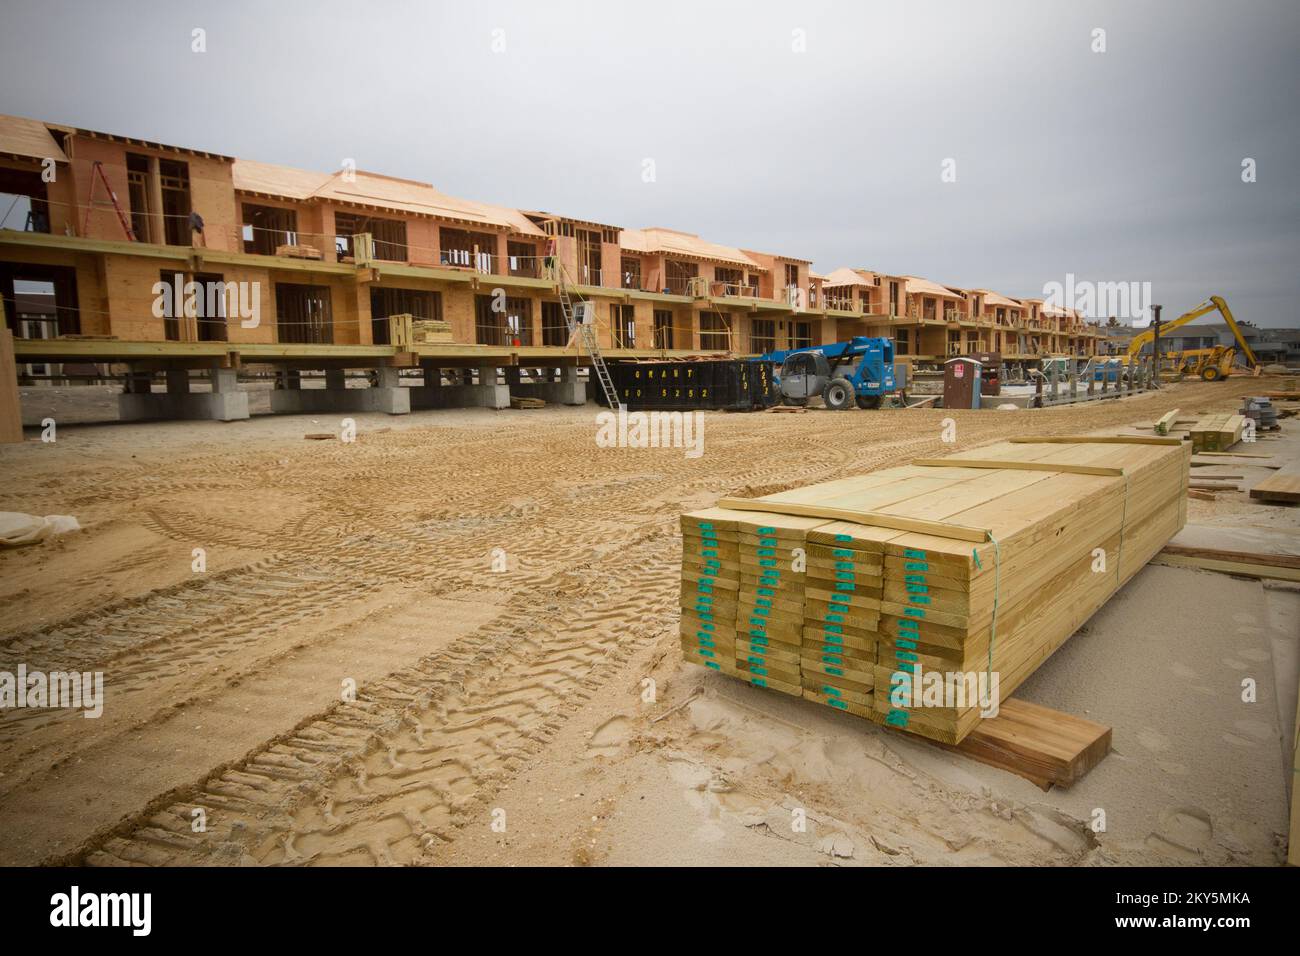 Private Cabanas are Rebuilt after Sandy. New Jersey Hurricane Sandy. Photographs Relating to Disasters and Emergency Management Programs, Activities, and Officials Stock Photo